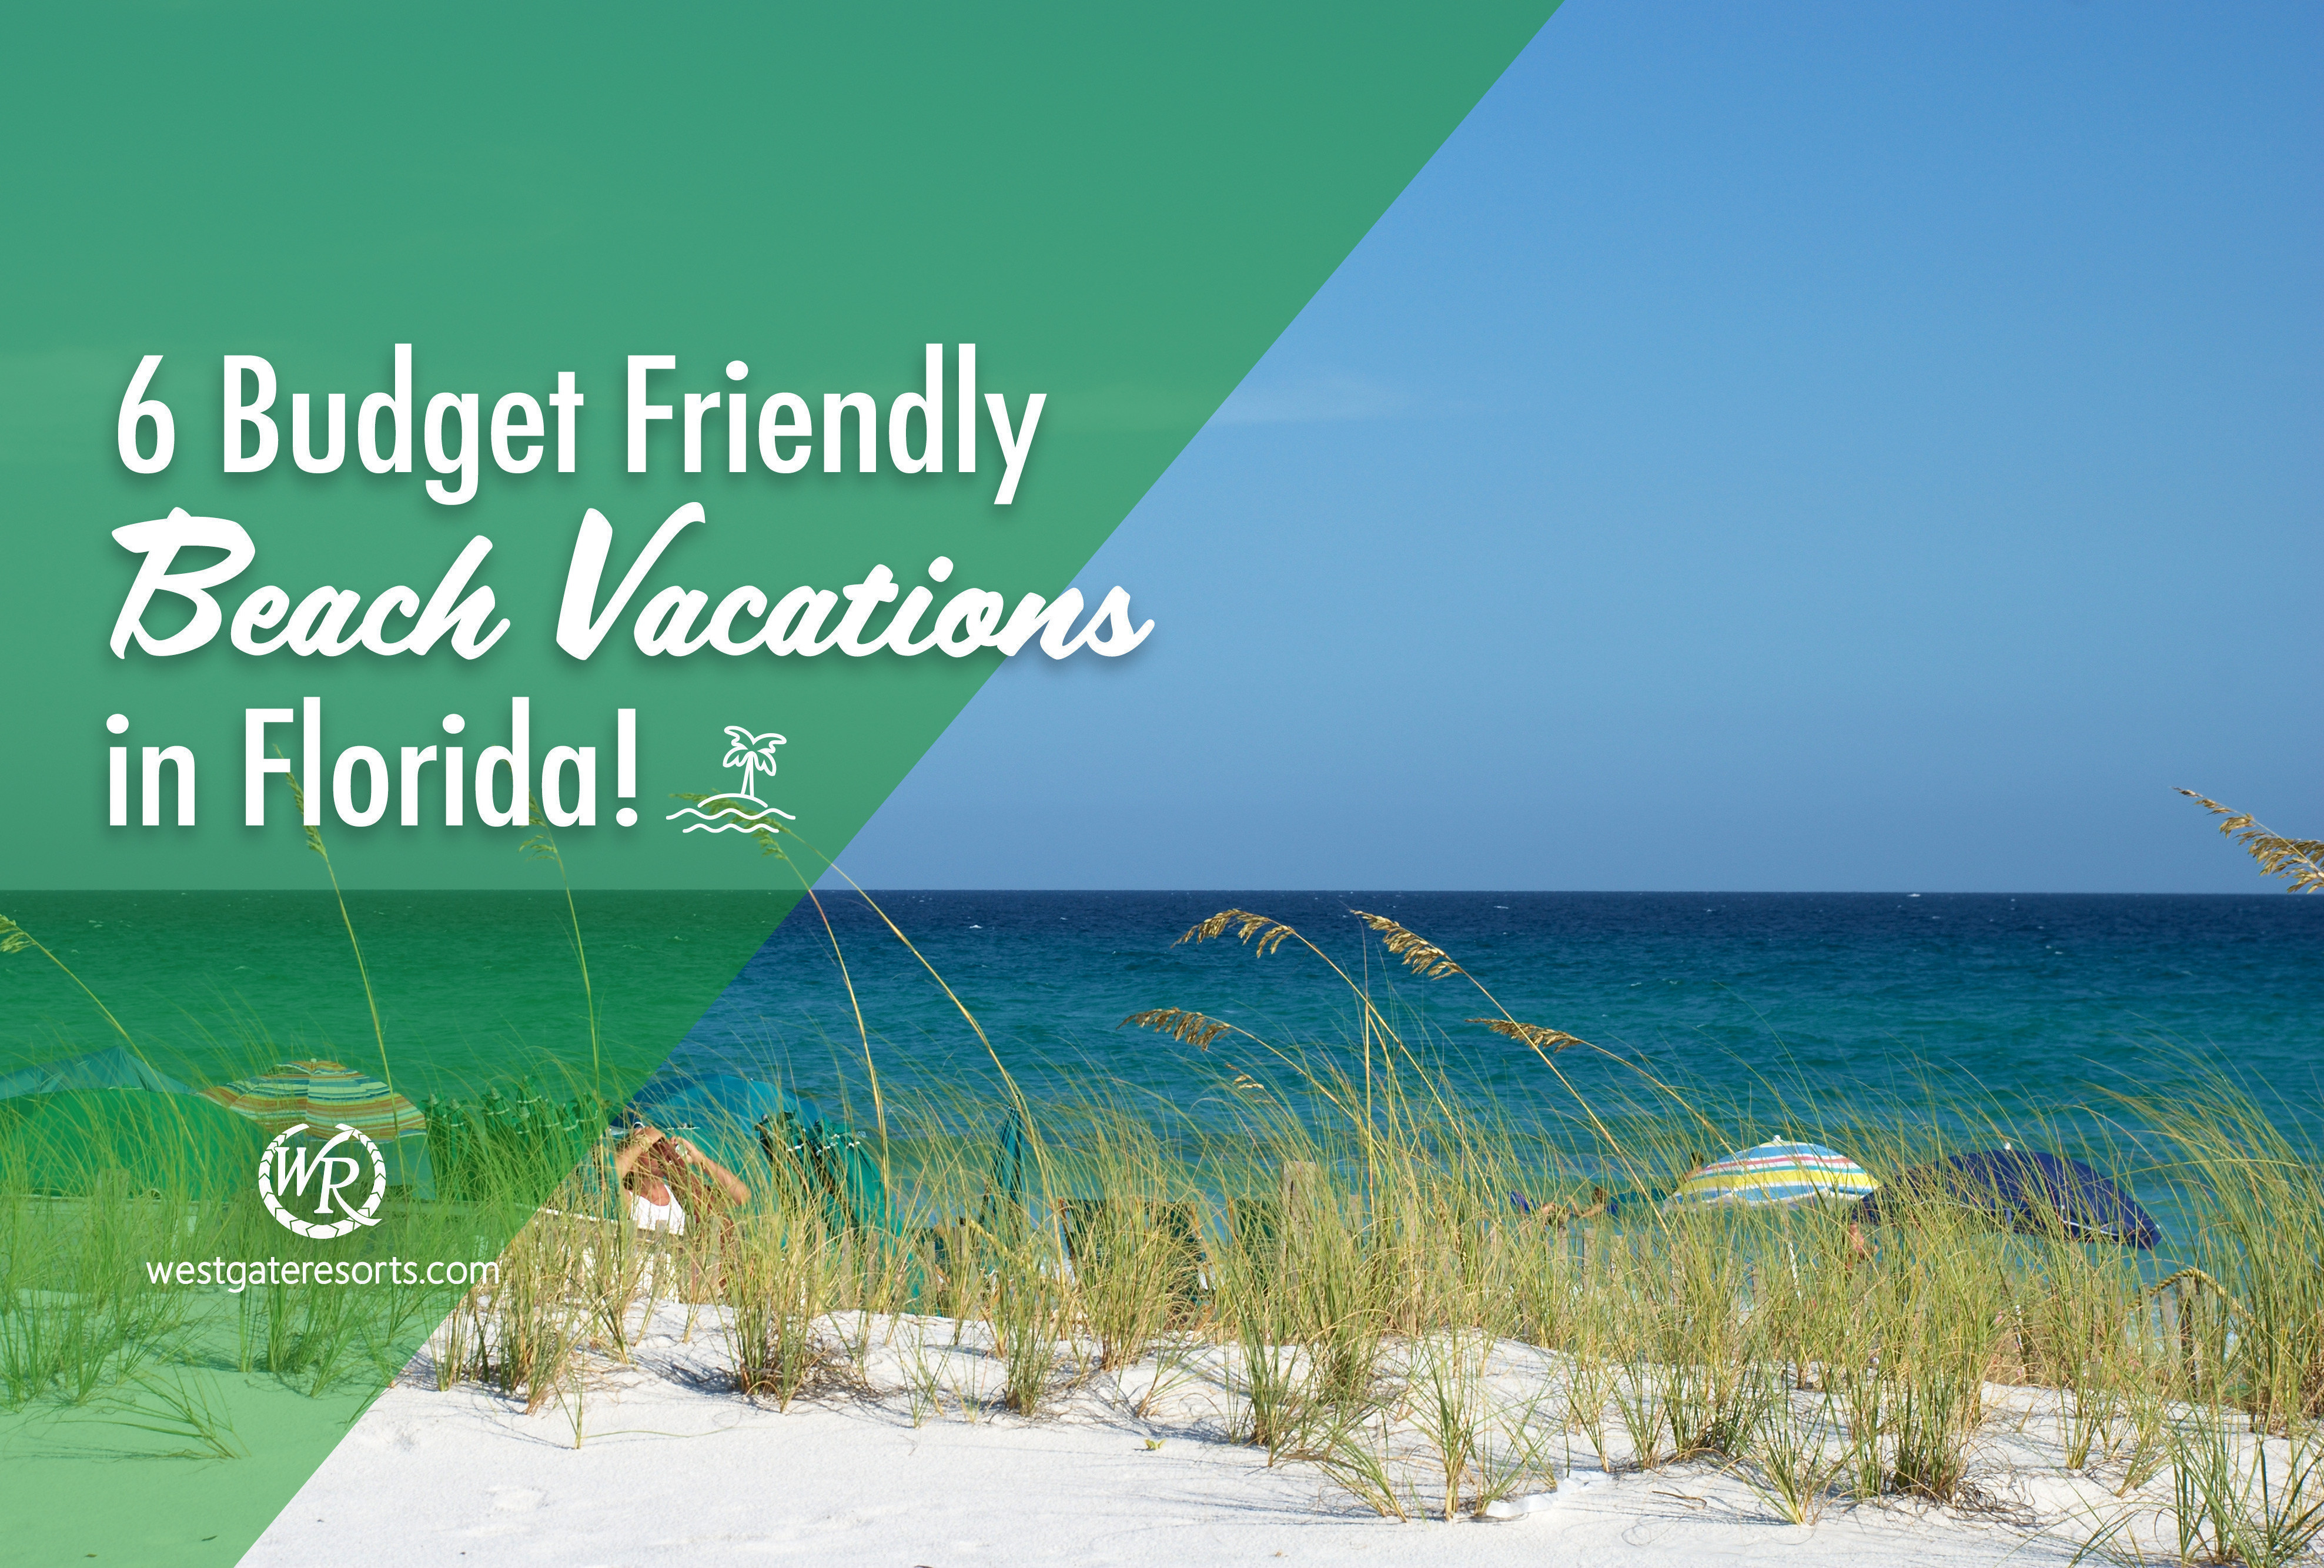 10 Budget Friendly Beach Vacations in Florida!